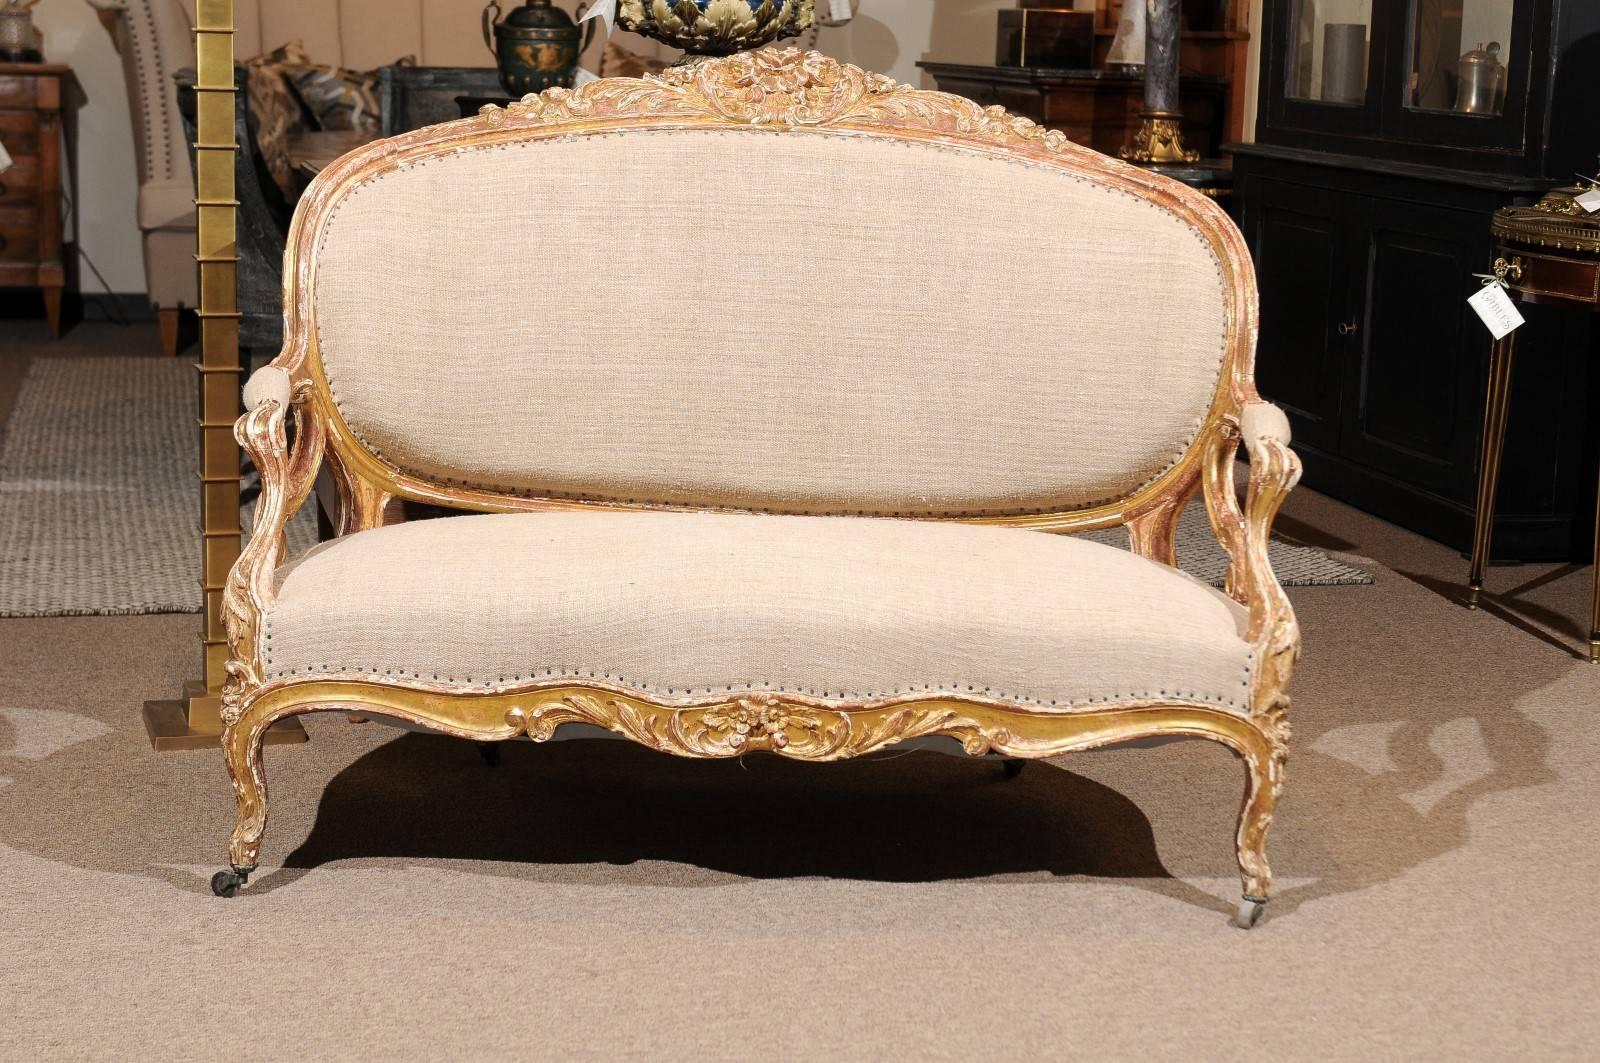 19th century Napoleon III giltwood settee, circa 1880
What a pretty little treasure! Add a touch of gilt to your decor. The settee is petite and comfortable in addition to stunning and fun. The finish is a shabby chic look, with worn off gilt and